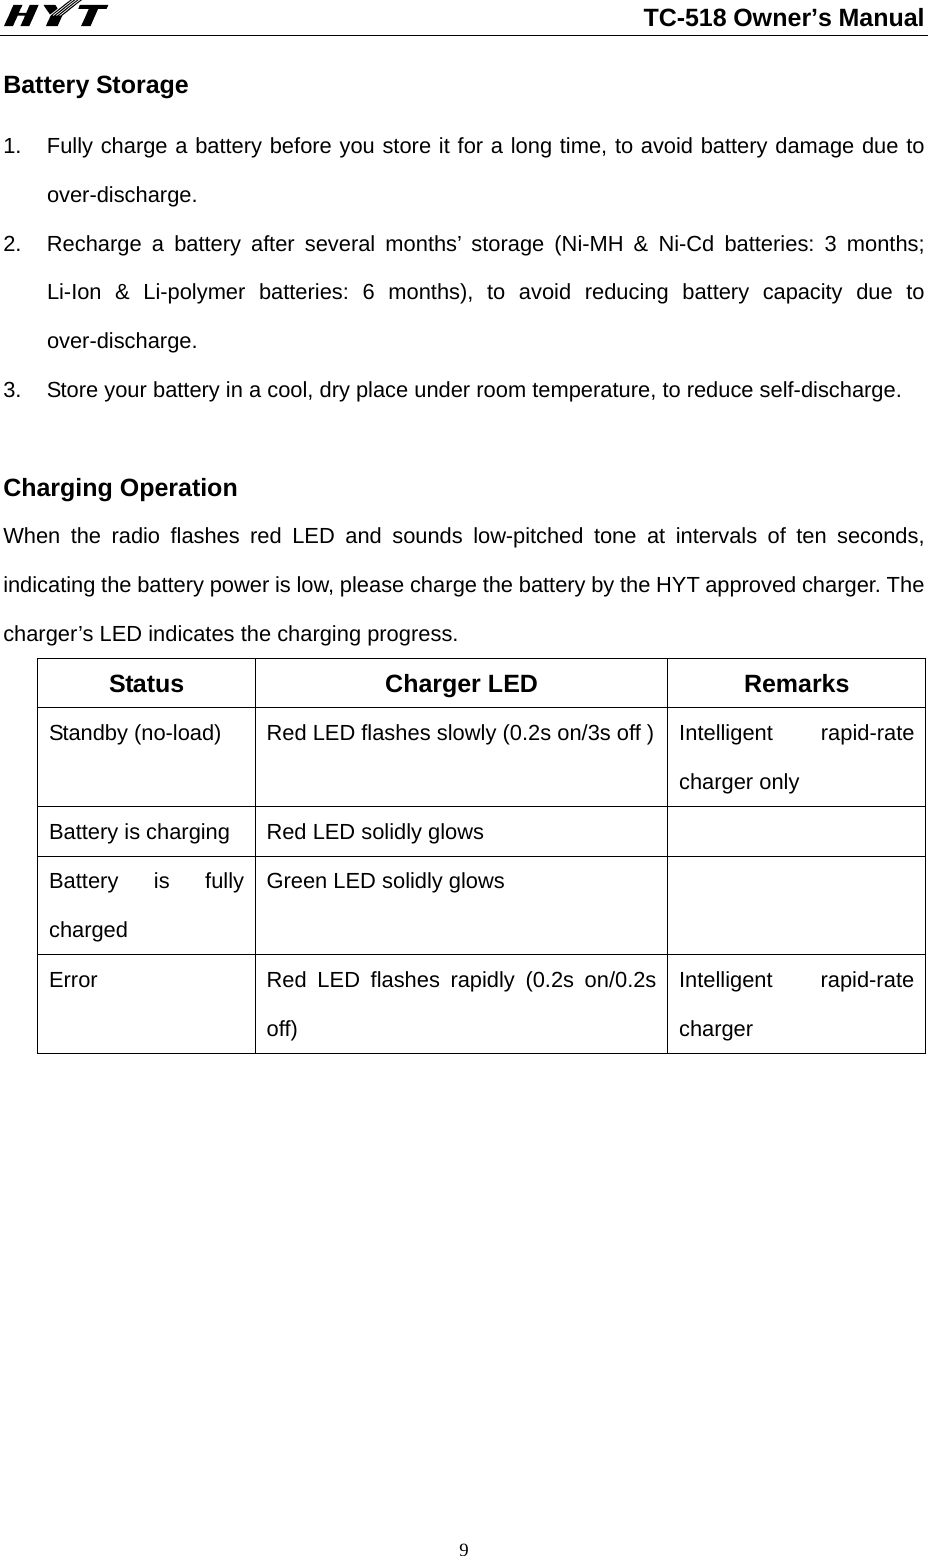                                                          TC-518 Owner’s Manual  9Battery Storage 1.  Fully charge a battery before you store it for a long time, to avoid battery damage due to over-discharge. 2.  Recharge a battery after several months’ storage (Ni-MH &amp; Ni-Cd batteries: 3 months; Li-Ion &amp; Li-polymer batteries: 6 months), to avoid reducing battery capacity due to over-discharge.  3.  Store your battery in a cool, dry place under room temperature, to reduce self-discharge.  Charging Operation   When the radio flashes red LED and sounds low-pitched tone at intervals of ten seconds, indicating the battery power is low, please charge the battery by the HYT approved charger. The charger’s LED indicates the charging progress. Status Charger LED  Remarks Standby (no-load)  Red LED flashes slowly (0.2s on/3s off ) Intelligent  rapid-rate charger only Battery is charging  Red LED solidly glows   Battery is fully charged Green LED solidly glows   Error  Red LED flashes rapidly (0.2s on/0.2s off)   Intelligent rapid-rate charger           